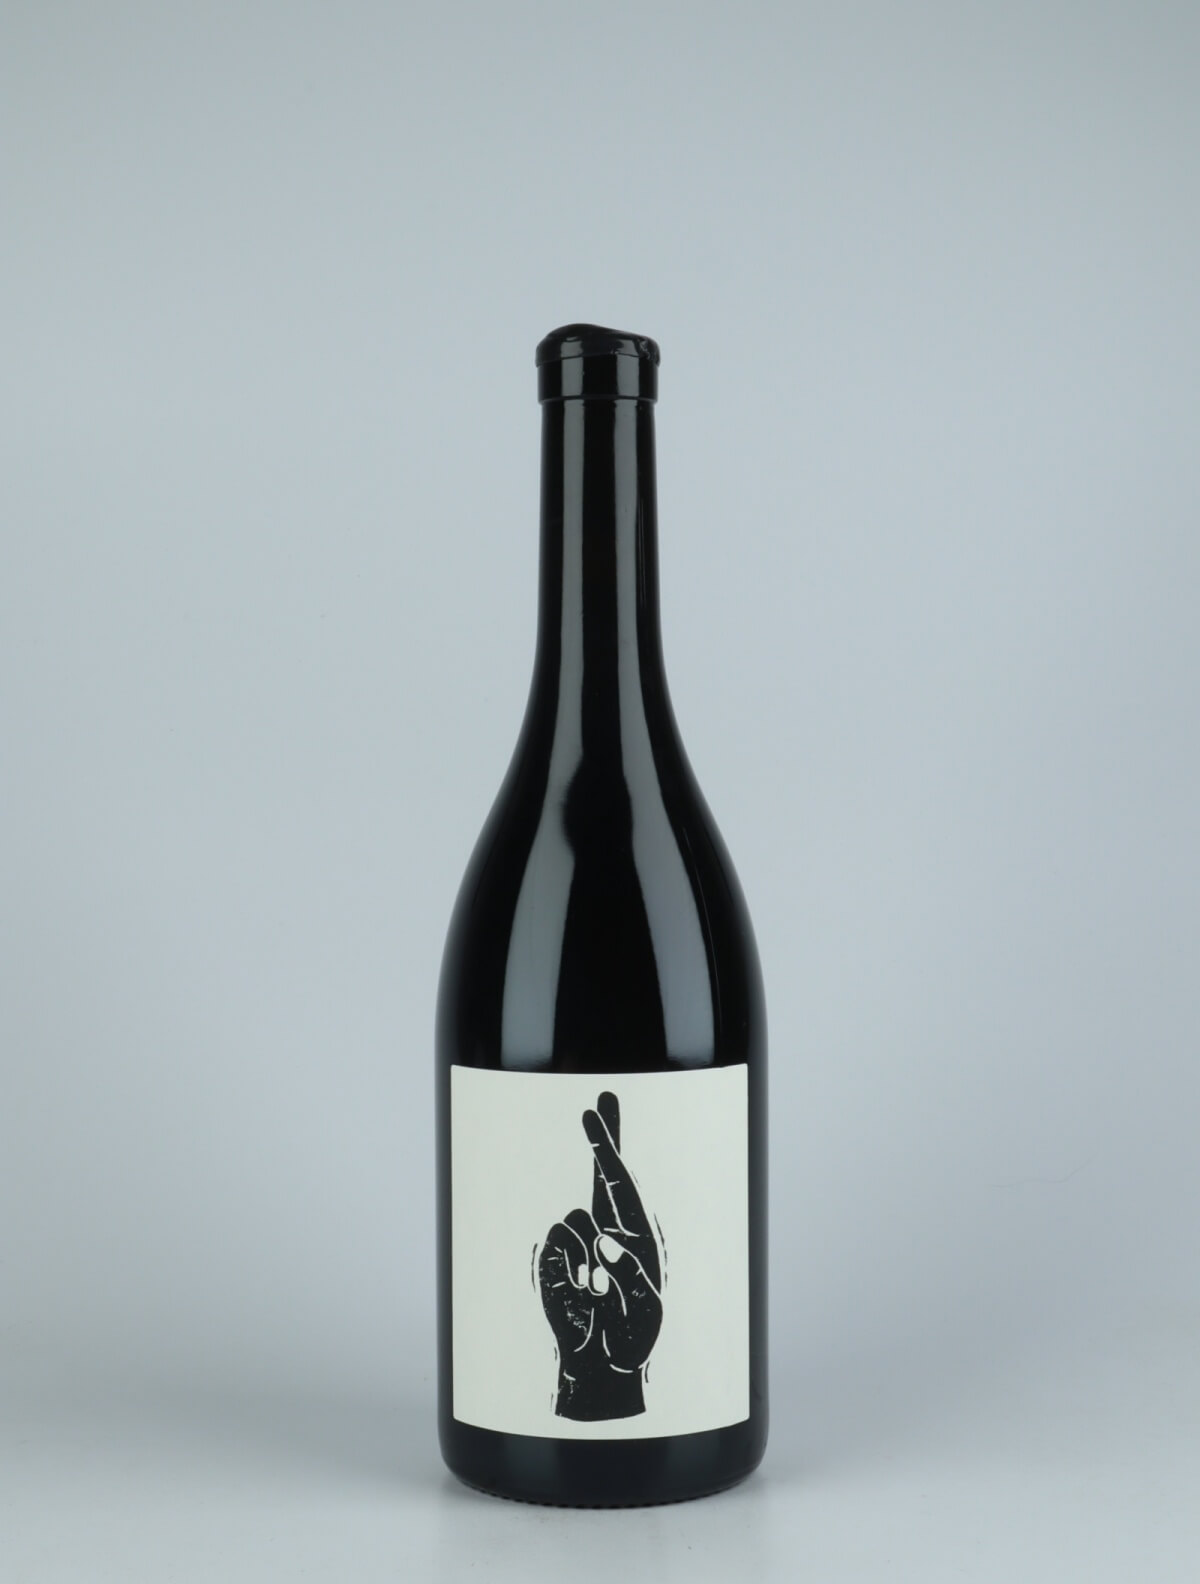 A bottle 2020 Nas sans Julie Red wine from Vin Noé, Beaujolais in France